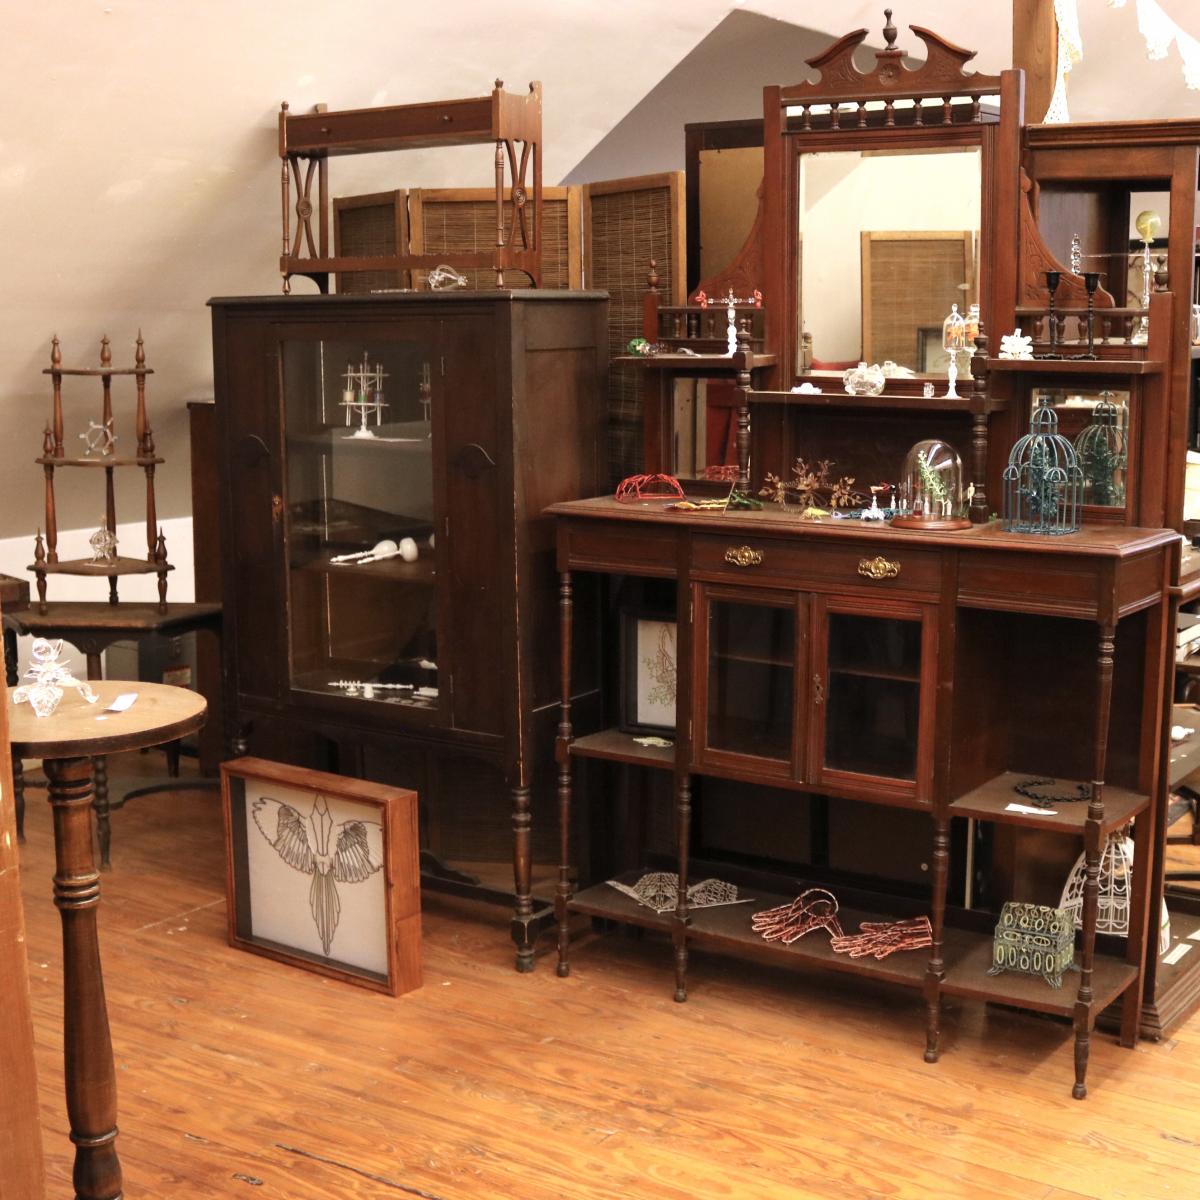 Shelves of furniture filled with objects used by the artist.